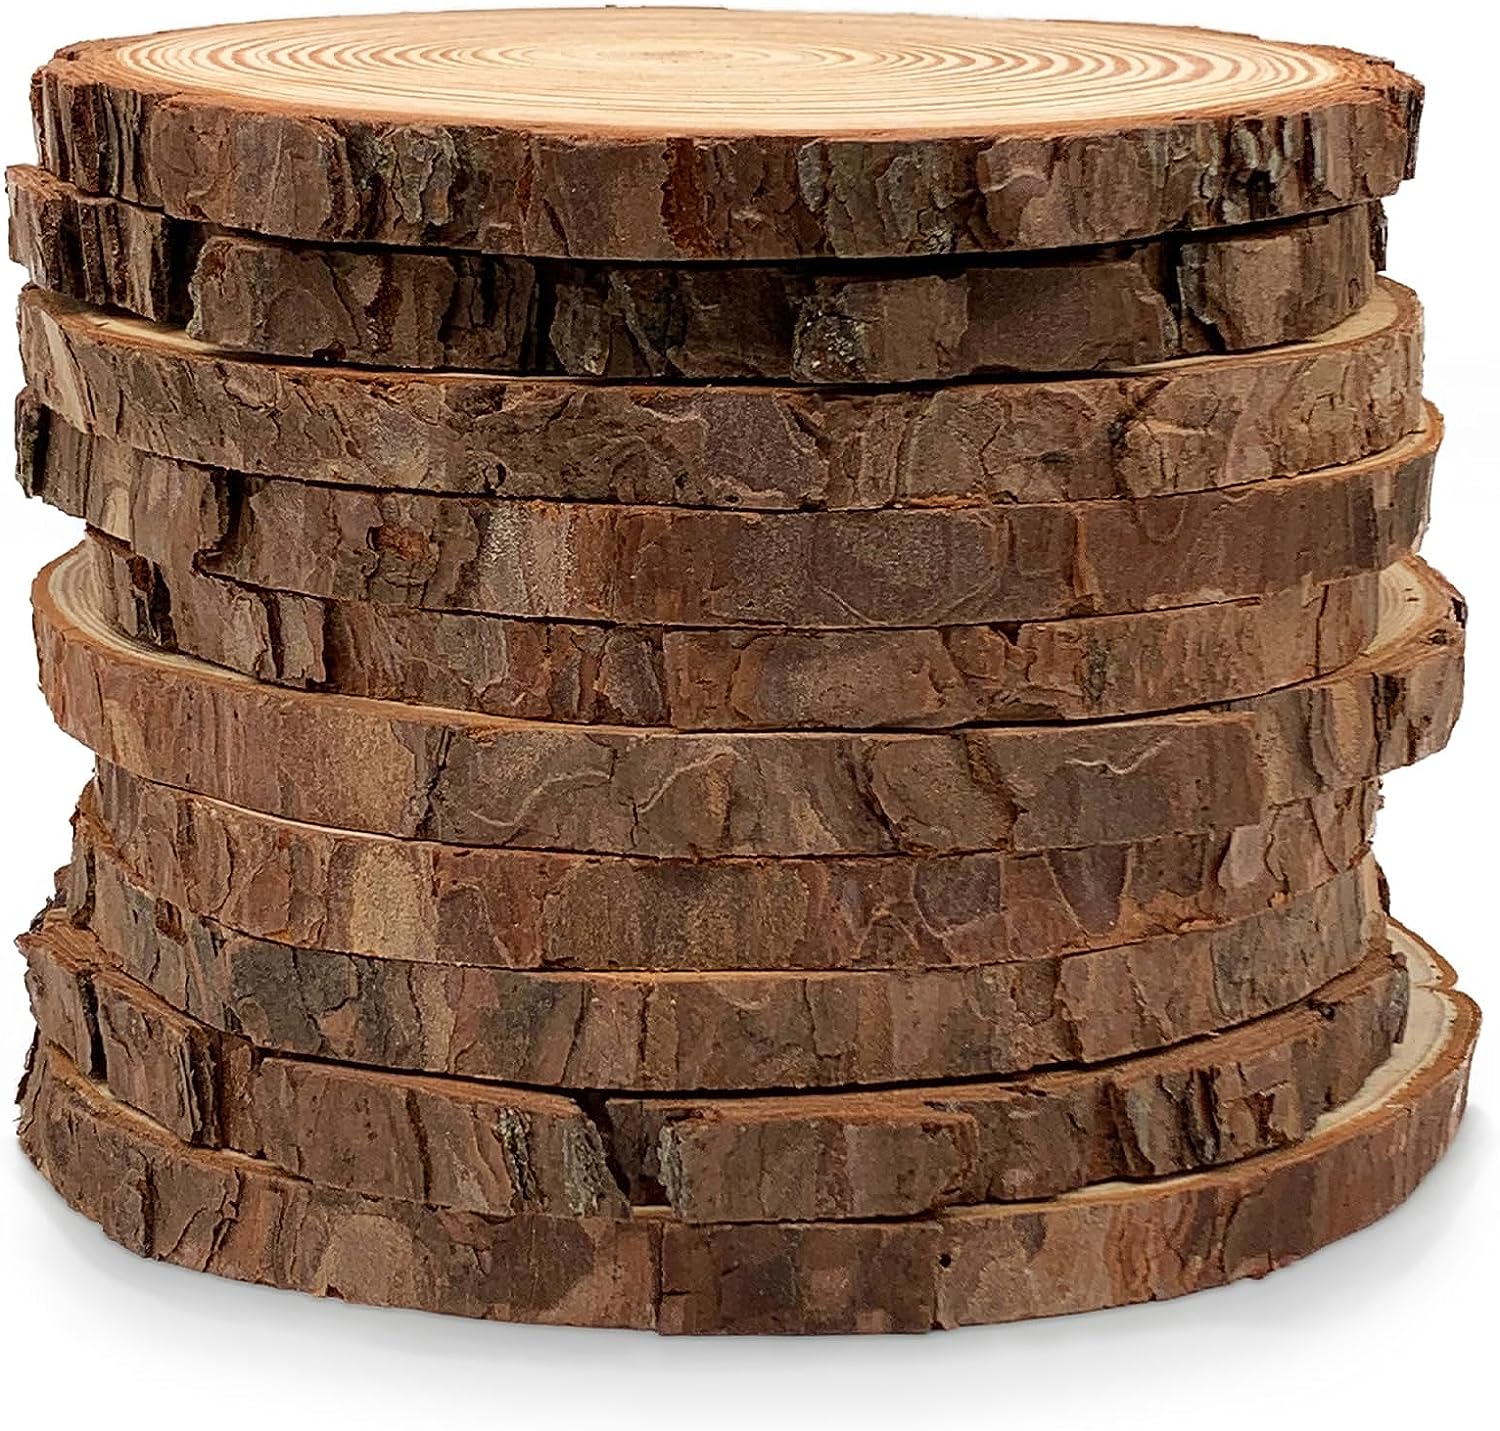 5Pcs Wood Slices 9-10 Inch Unfinished Natural with Tree Barks Diameter  Large Cir